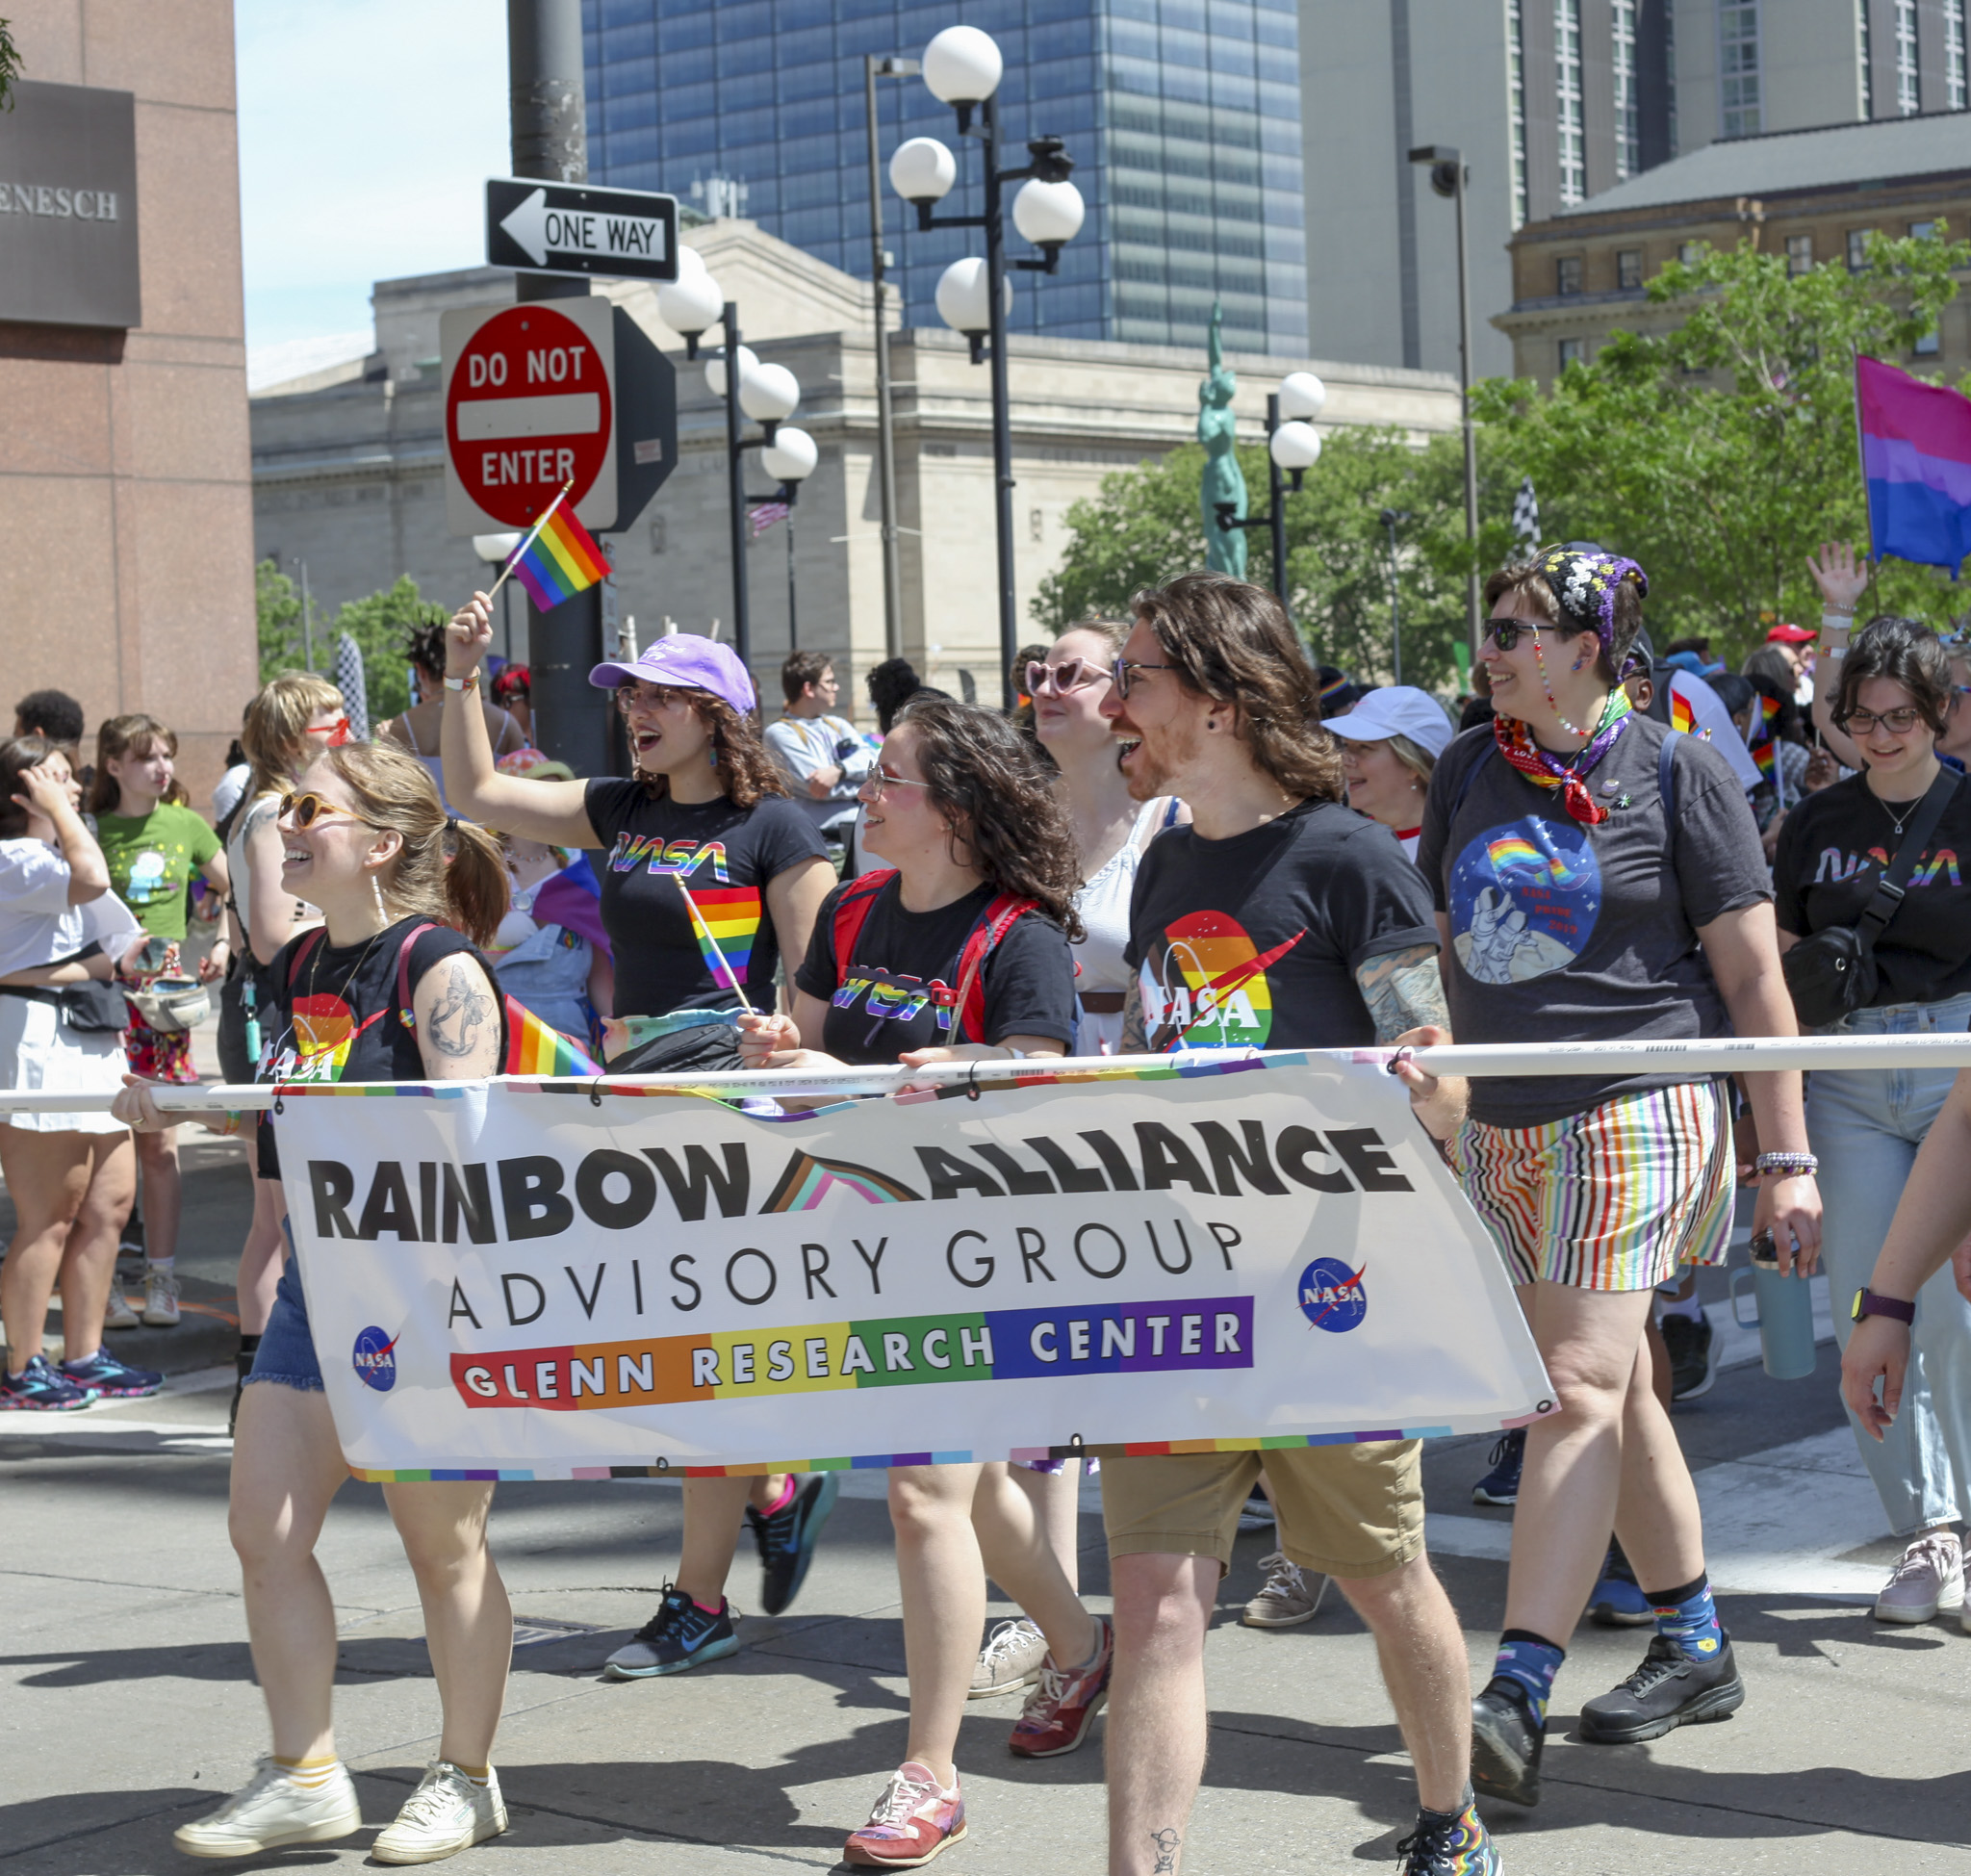 NASA’s Glenn Research Center employees enthusiastically walk in the “Pride in the CLE” parade while wearing colorful shirts and carrying the NASA Glenn Research Center Rainbow Alliance Advisory Group flag in front.